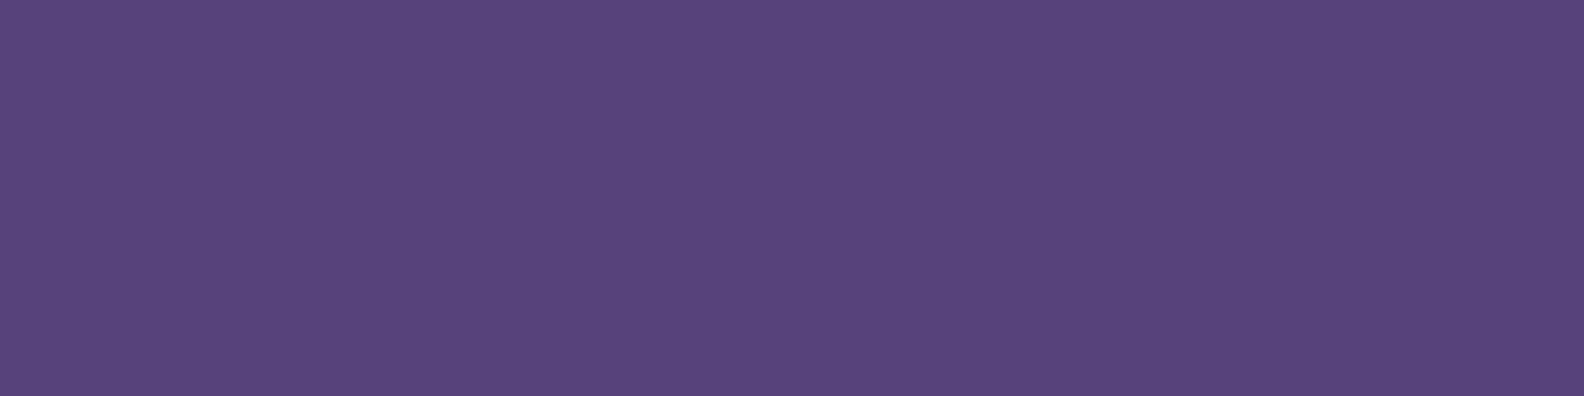 1584x396 Cyber Grape Solid Color Background